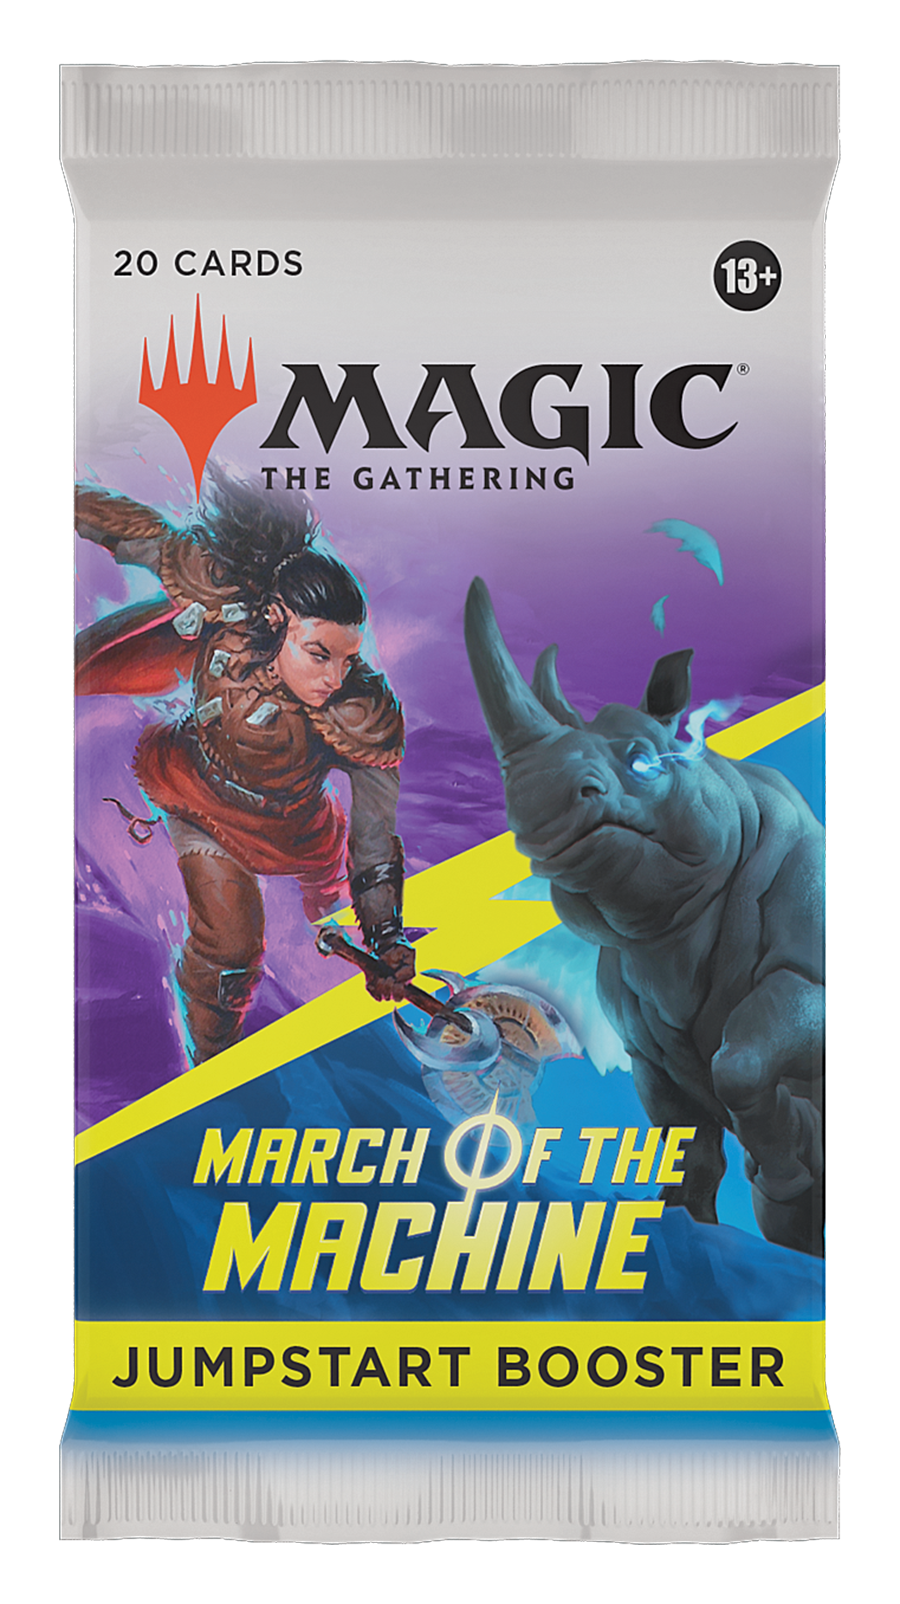 Magic: The Gathering - March of the Machine Jumpstart Pack *Sealed*